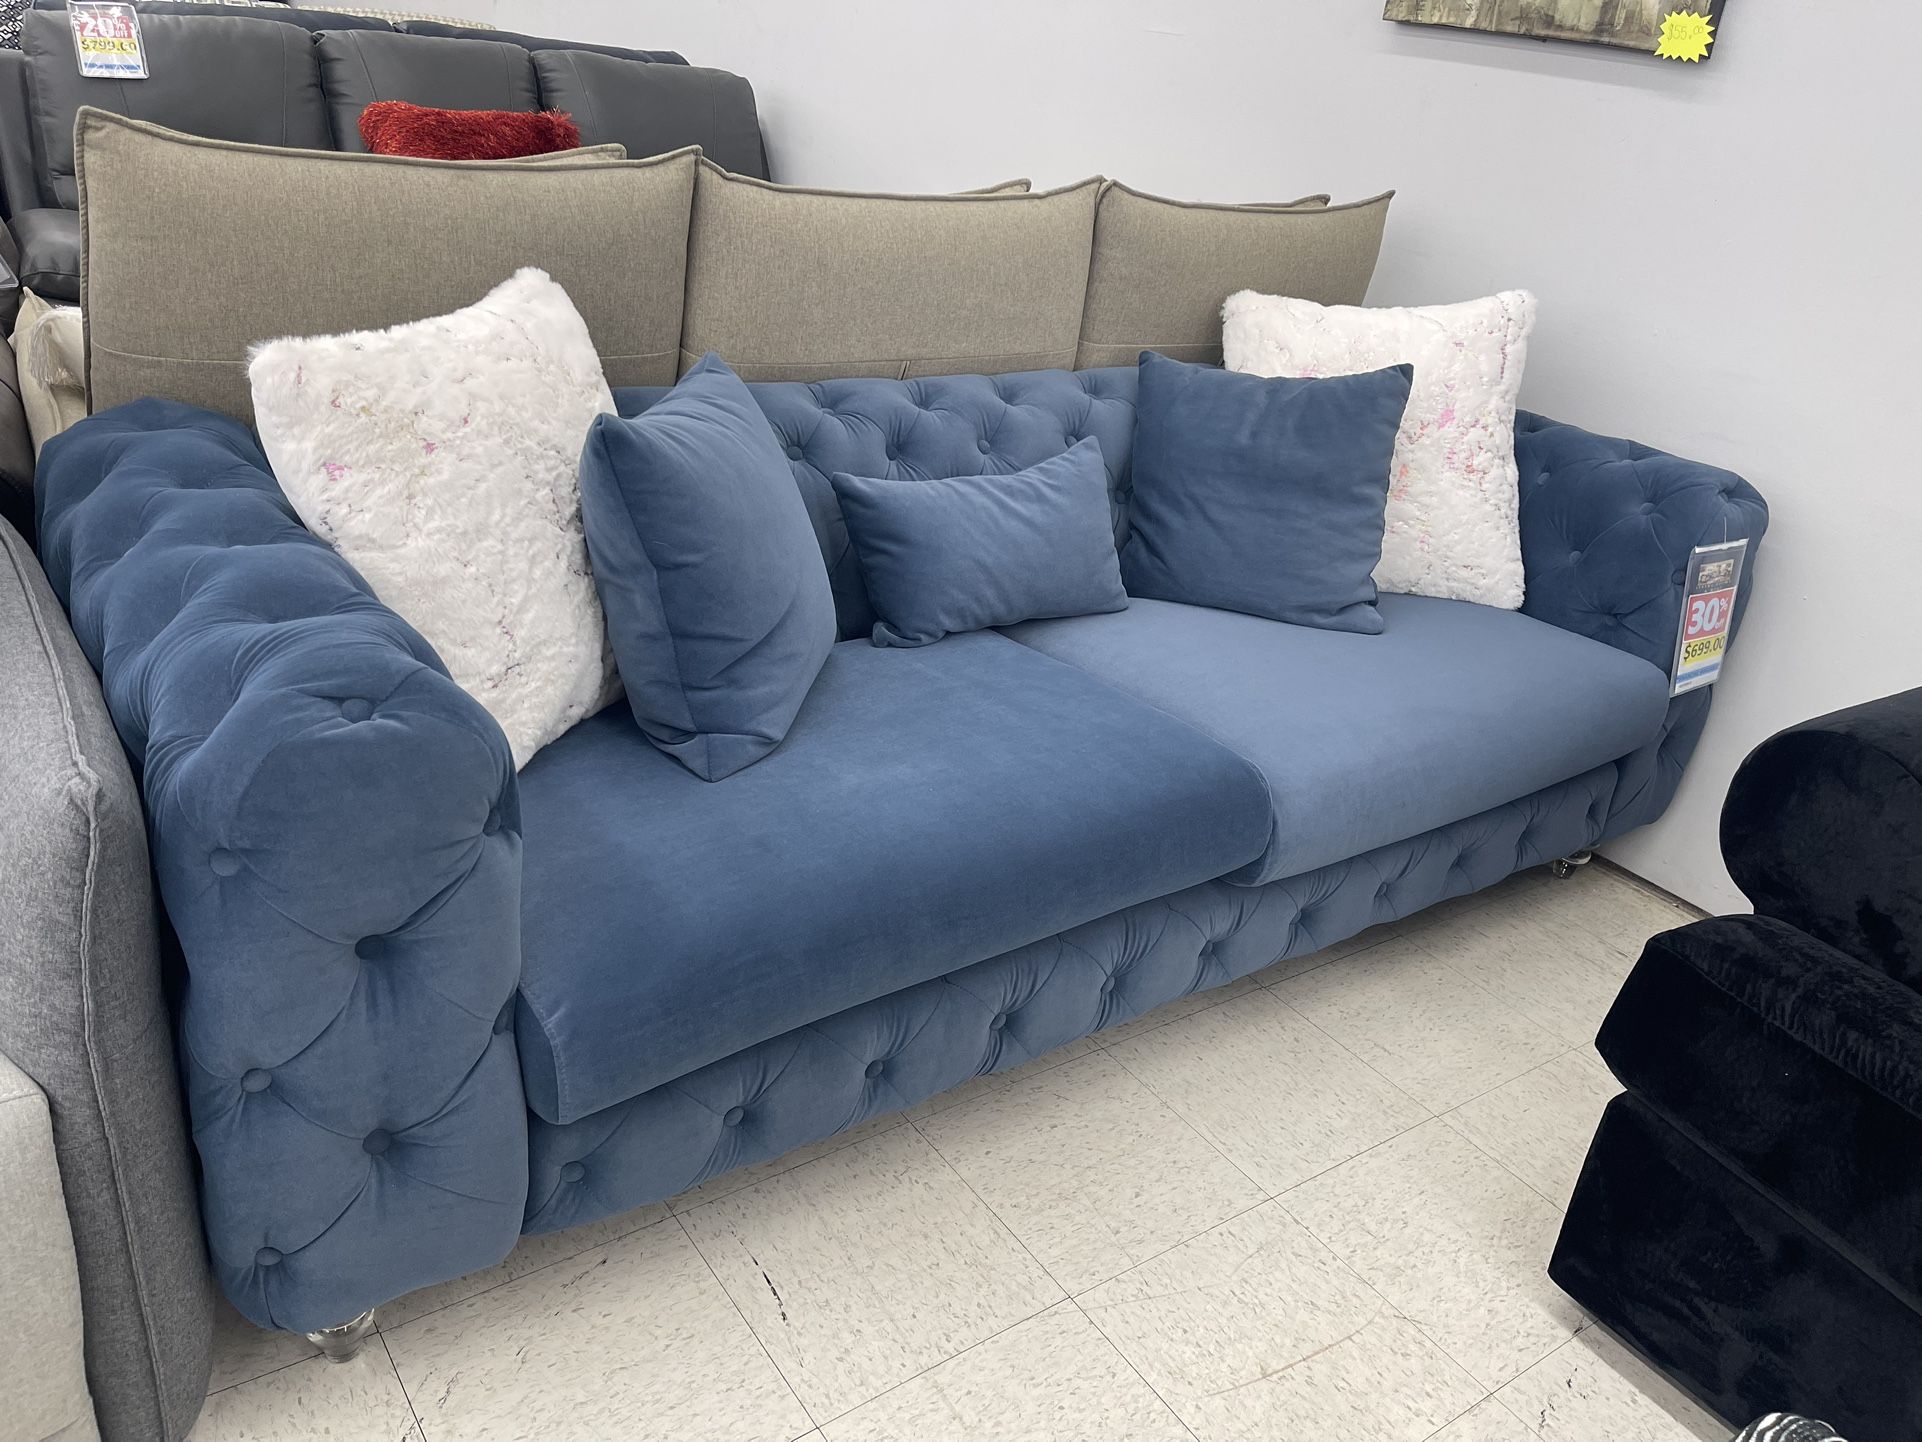 Sofa ( White Pillows Not Included)